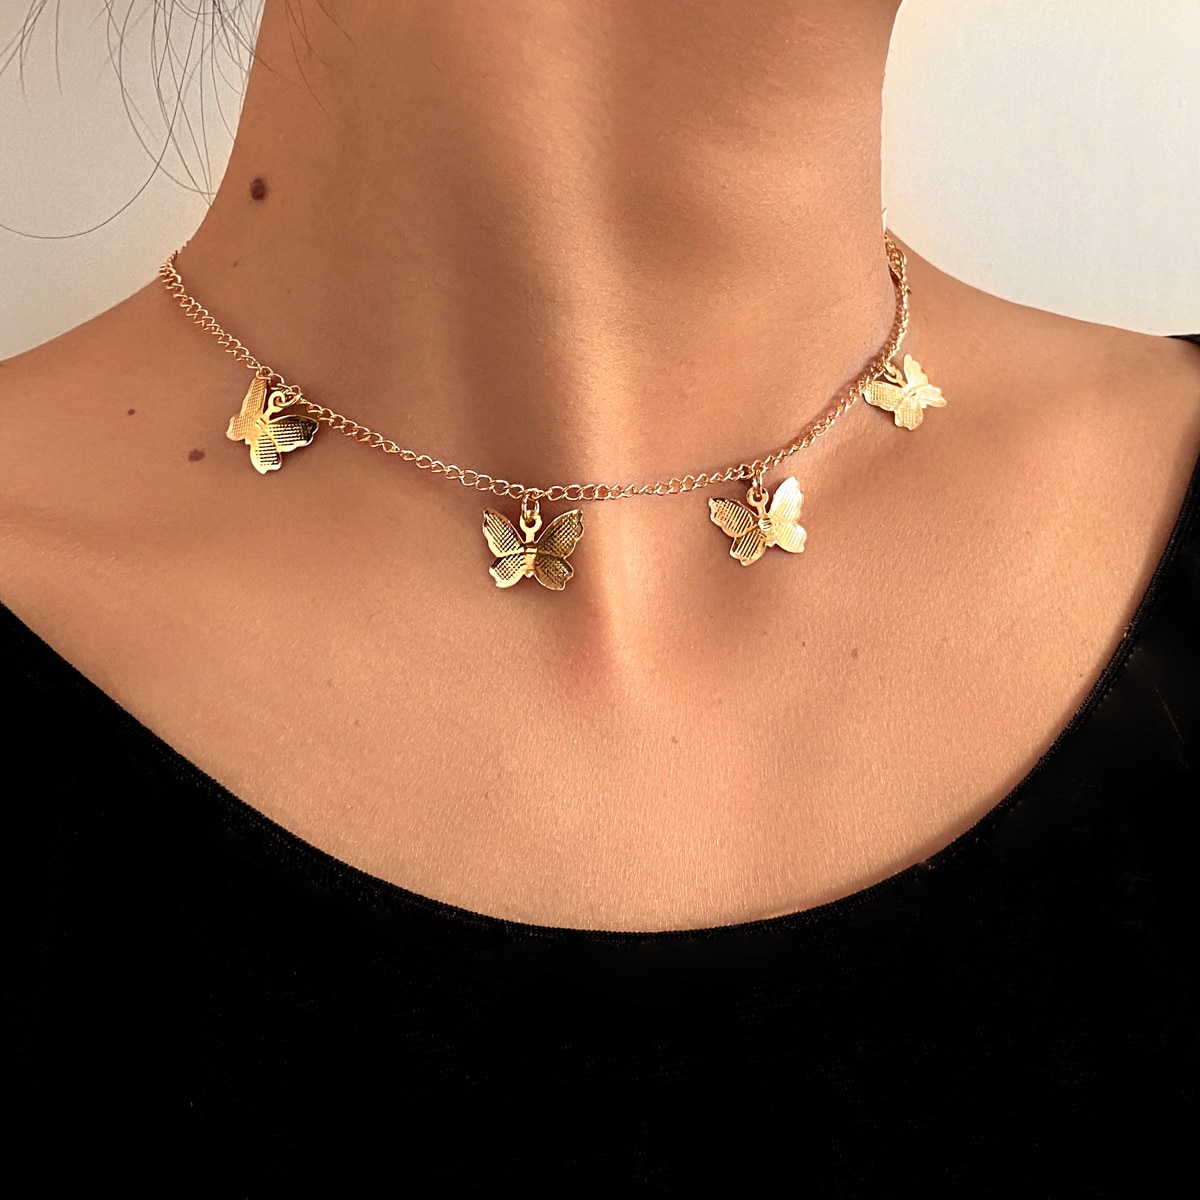 A woman adorned in a Gold Chain Butterfly Pendant Choker for Women with three delicate butterflies.